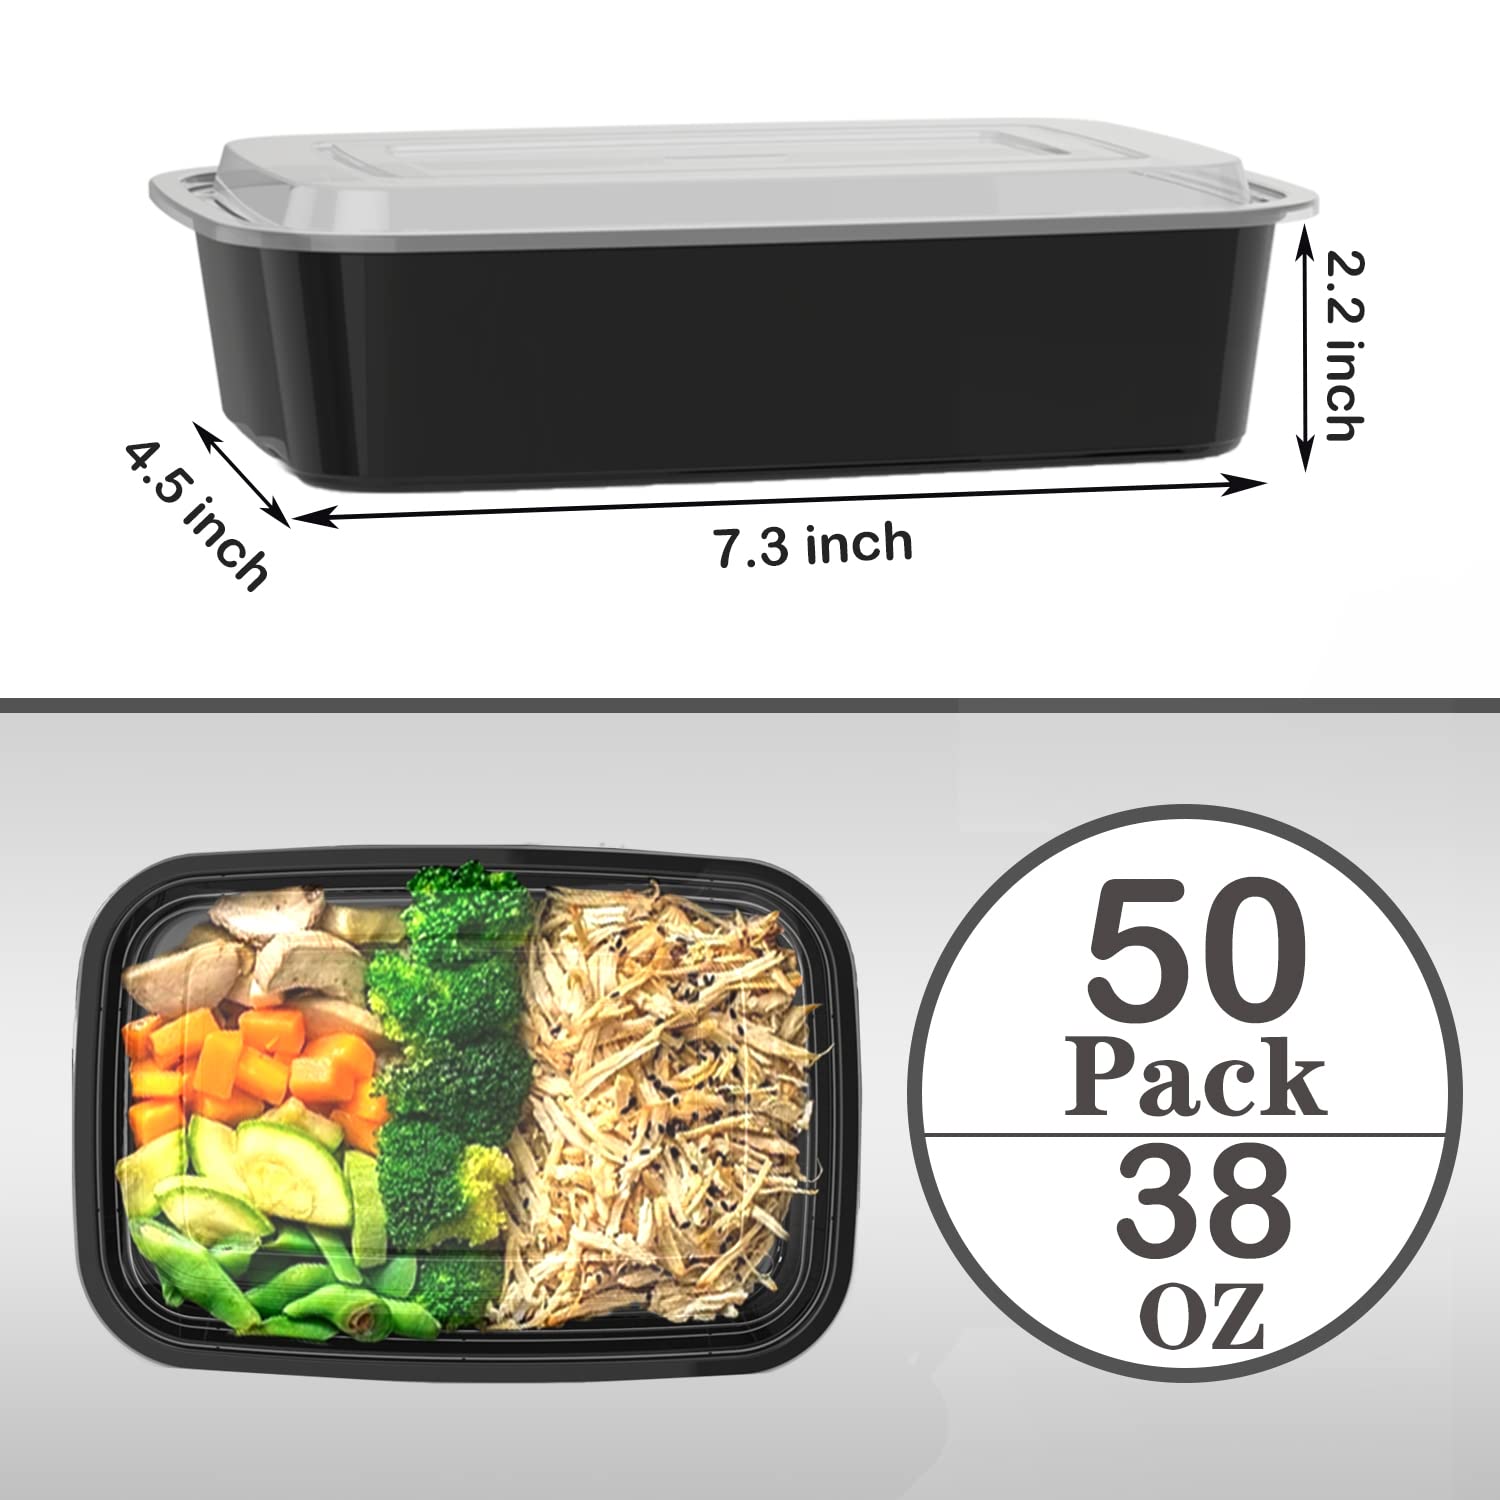 Goiio 50 Pack 38 Oz Meal Prep Container, Food Storage Containers with Lids, Disposable Bento Box Reusable Plastic Lunch Box Kitchen Food Take-Out Box Microwave Dishwasher Freezer Safe